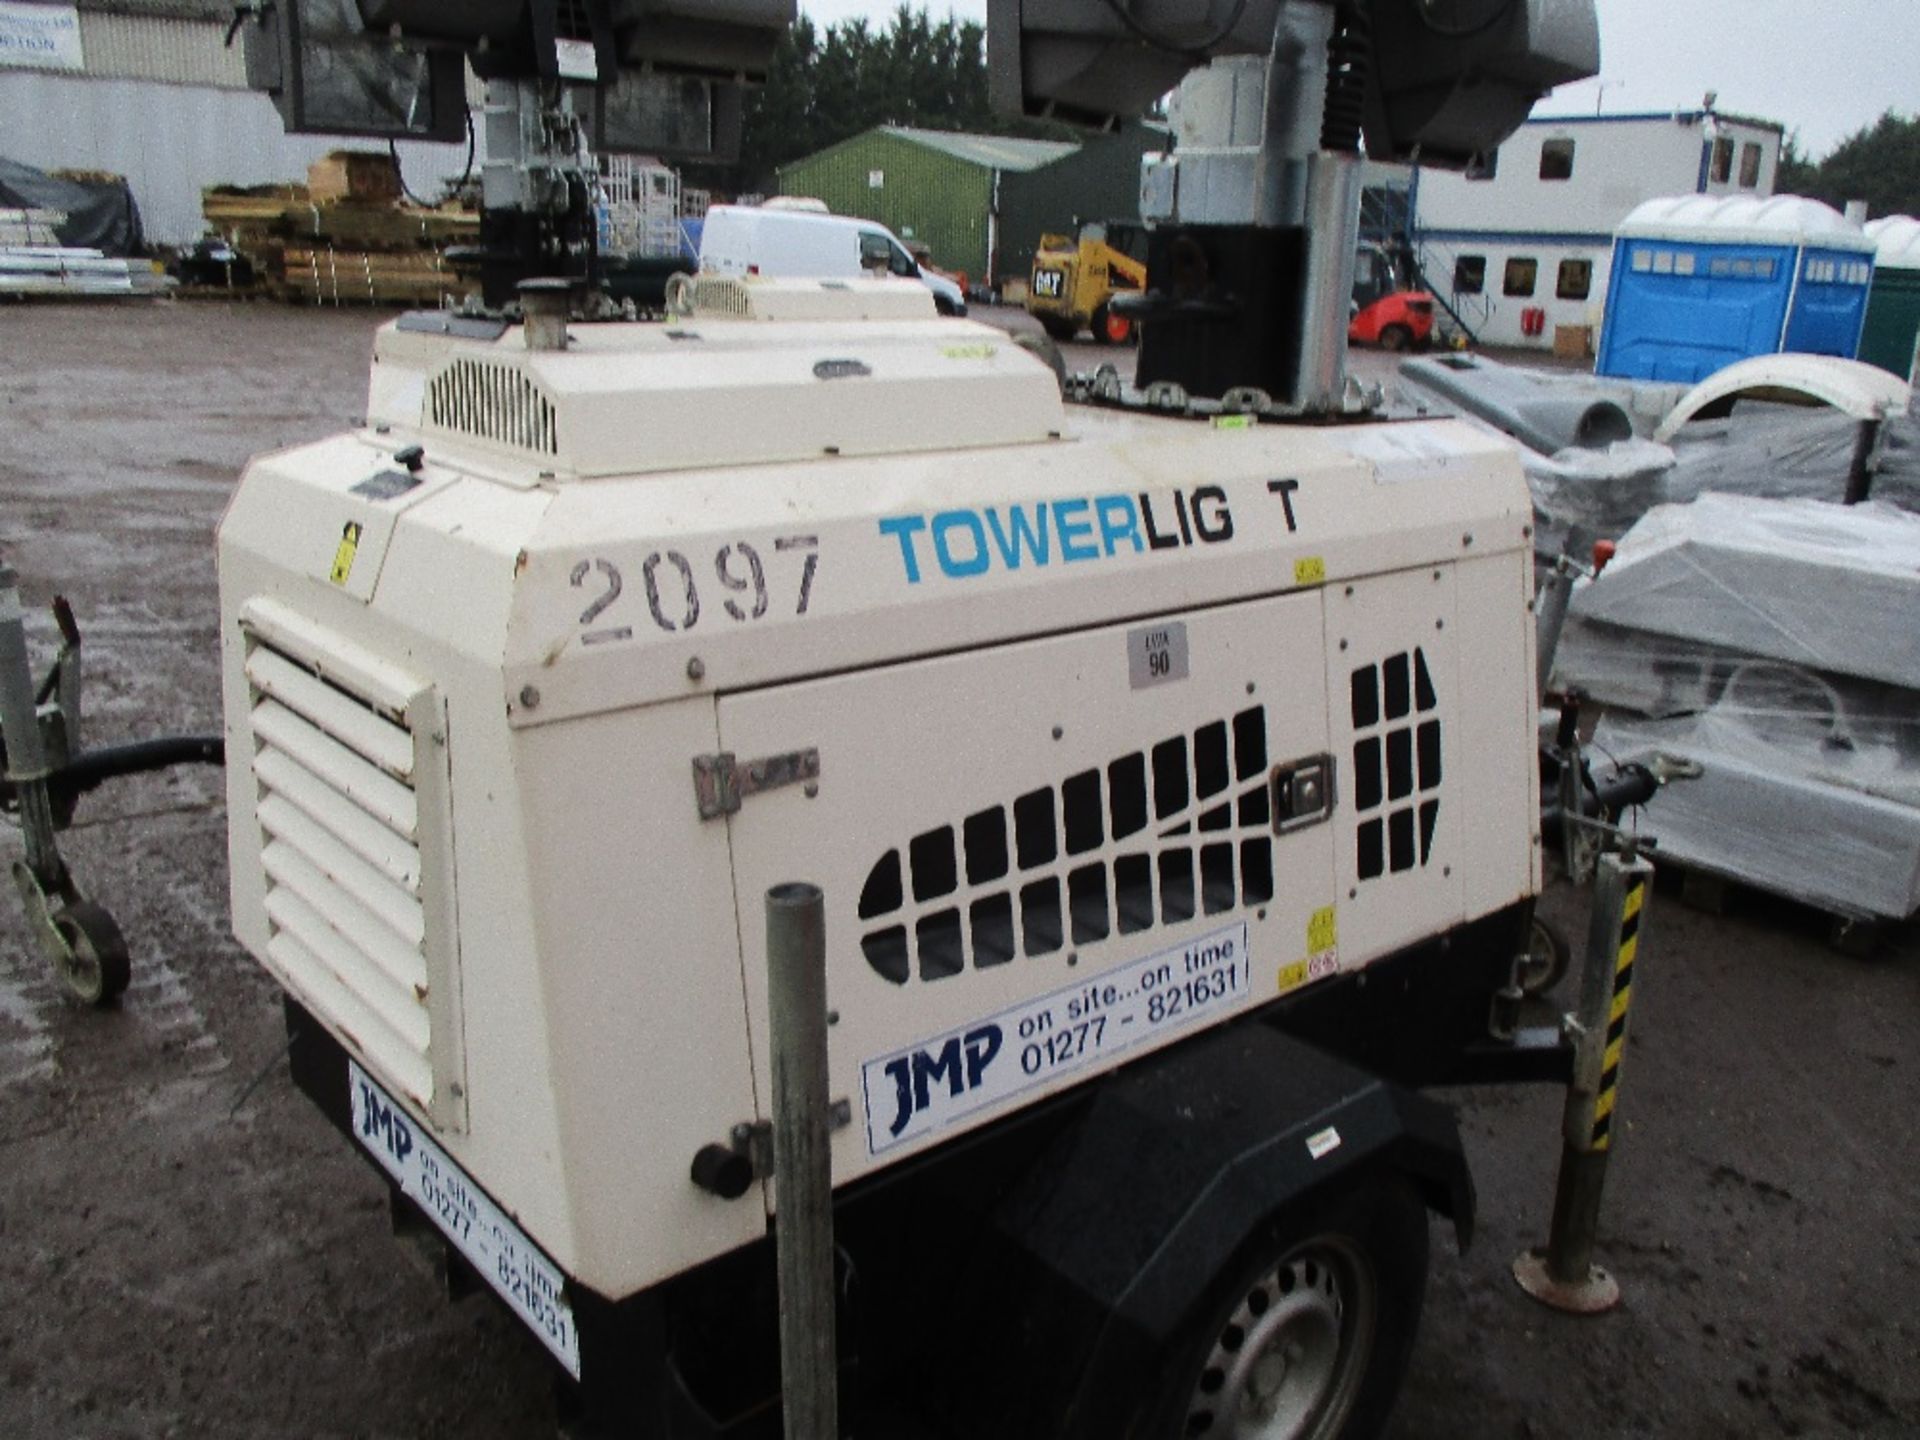 VT1 TOWER LIGHT LIGHTING TOWER YEAR 2012 PLANT ID NUMBER: 2097 WHEN TESTED: RUNS AND LIGHTS  AND